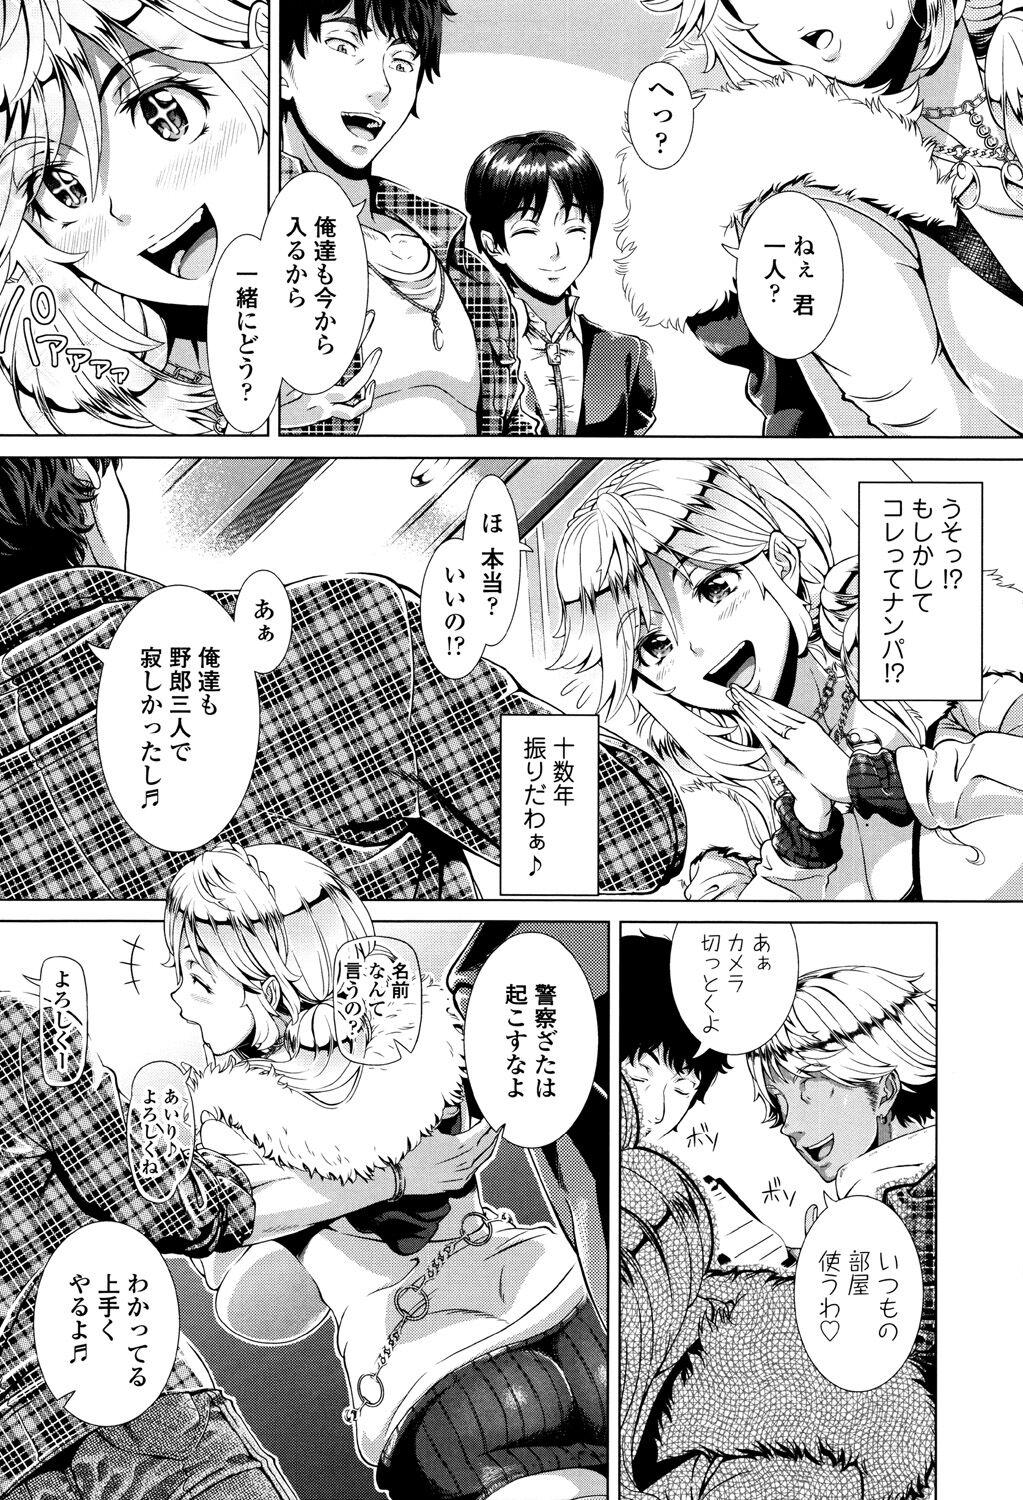 Stepfamily Hitozuma Life - Married Woman Life Oldyoung - Page 7